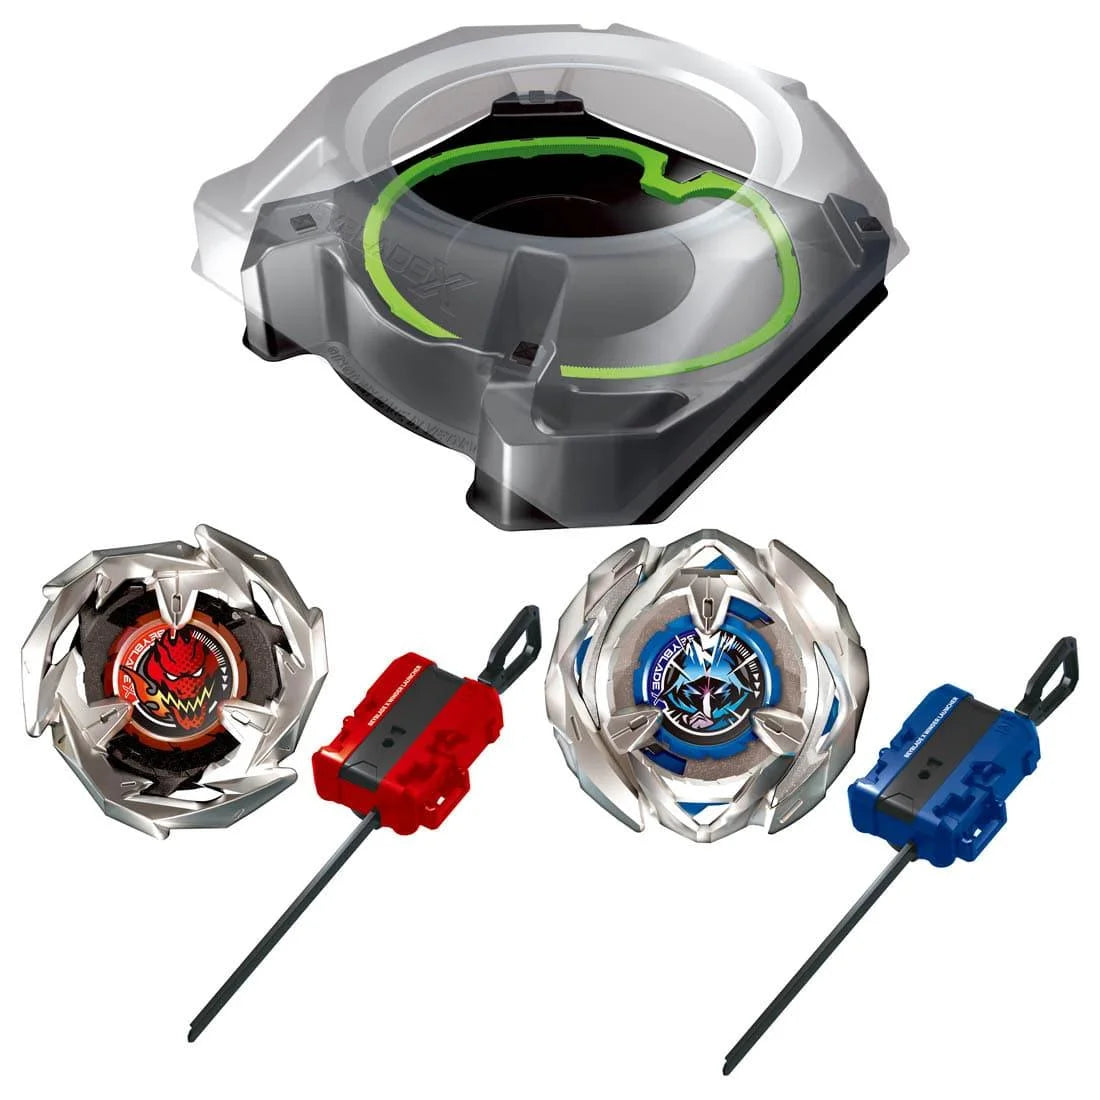 Bey stadium, beyblades and launchers included in the pack of BX 17